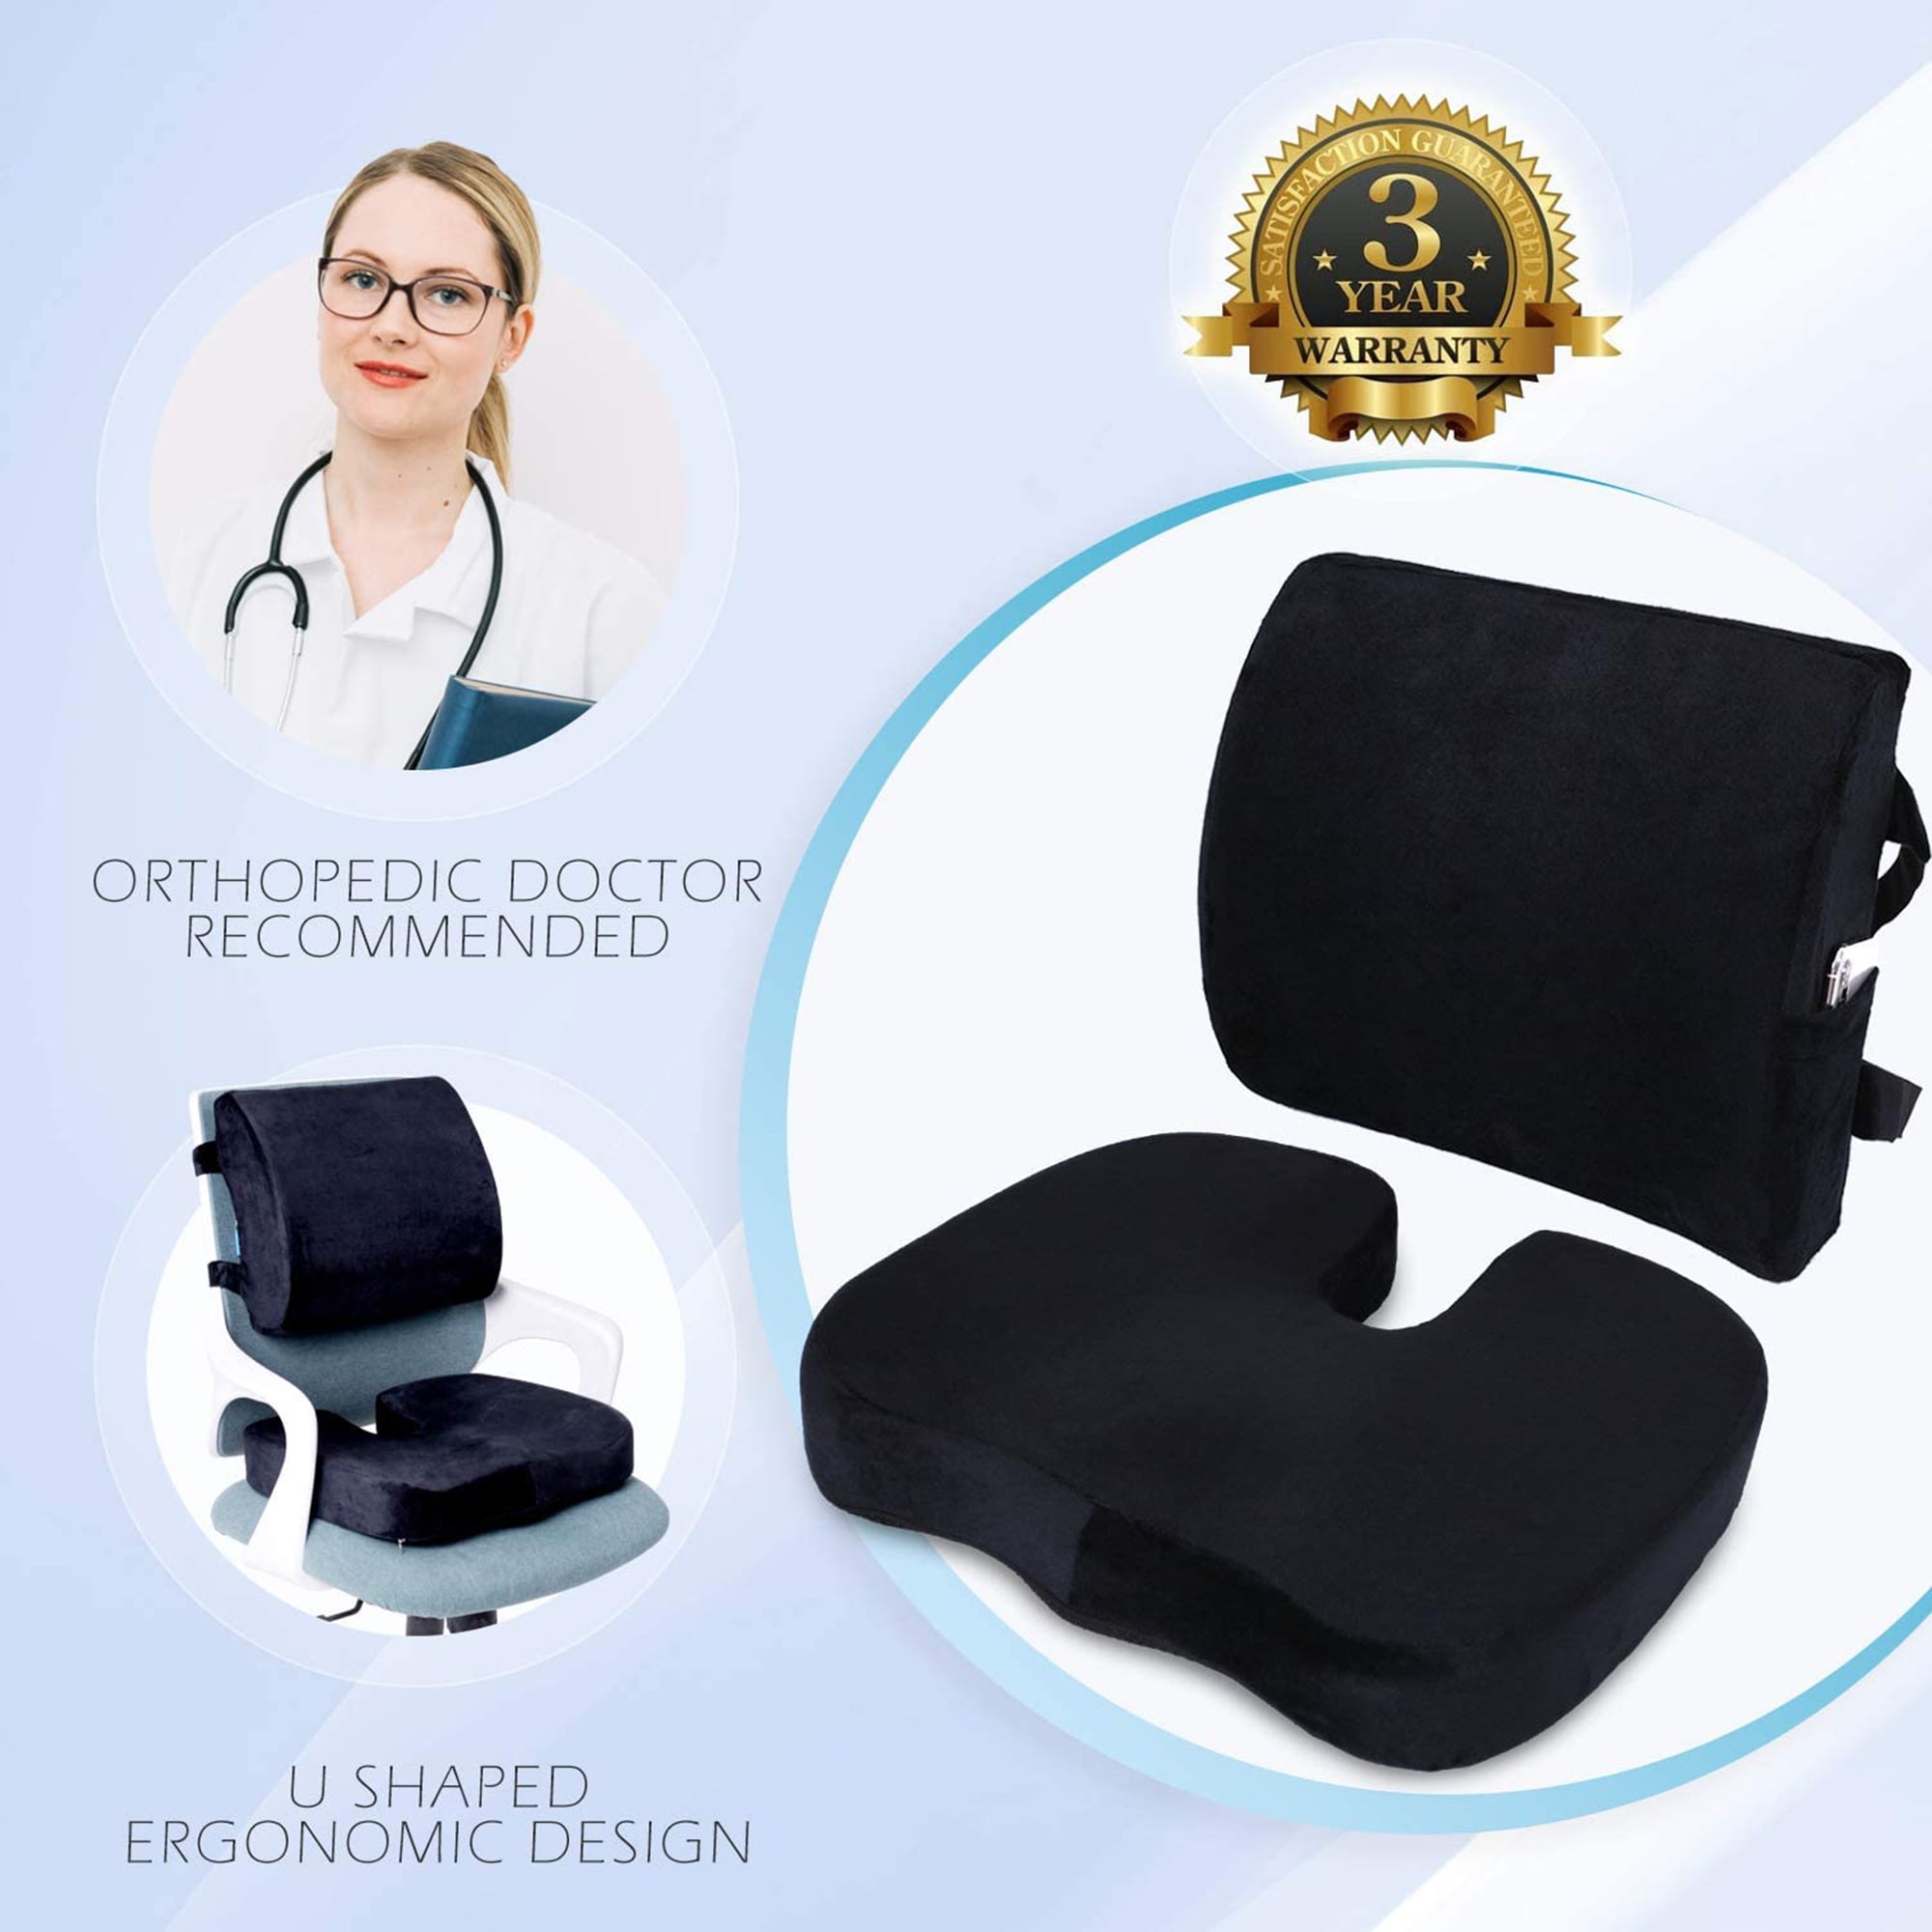 Memory Foam Auto Cushion Orthopedic Pillow Coccyx Cushion Support  Breathable Pad Car Seat Protector Hip Massage